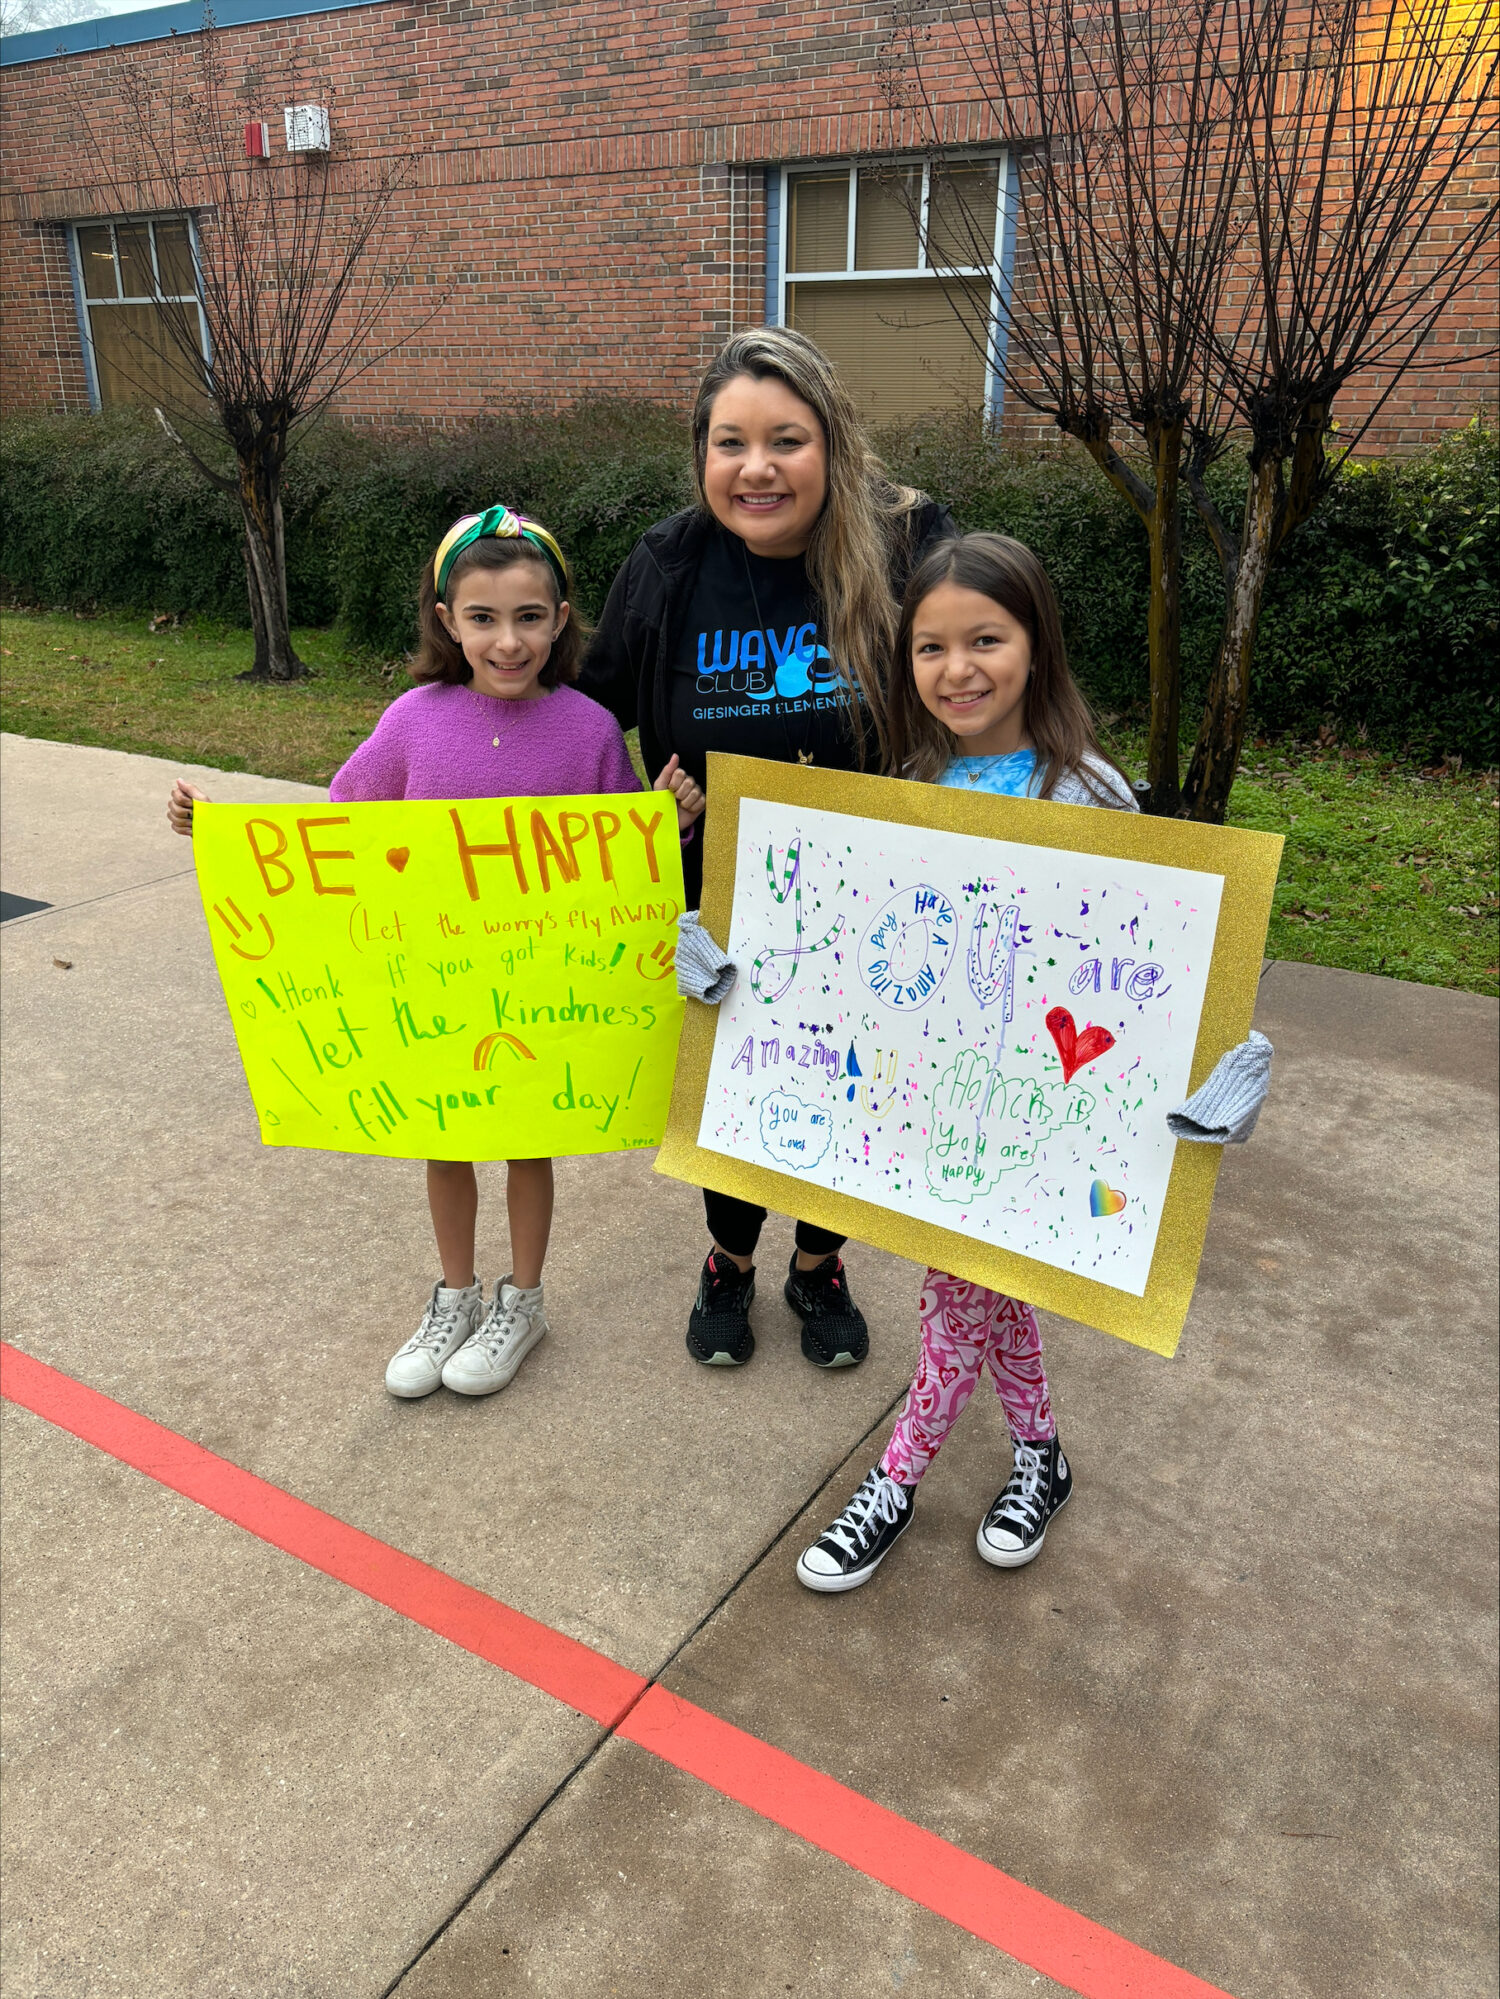 Two girls and their teacher hold up signs to greet people in the car line as members of the Geisinger Wave Club.